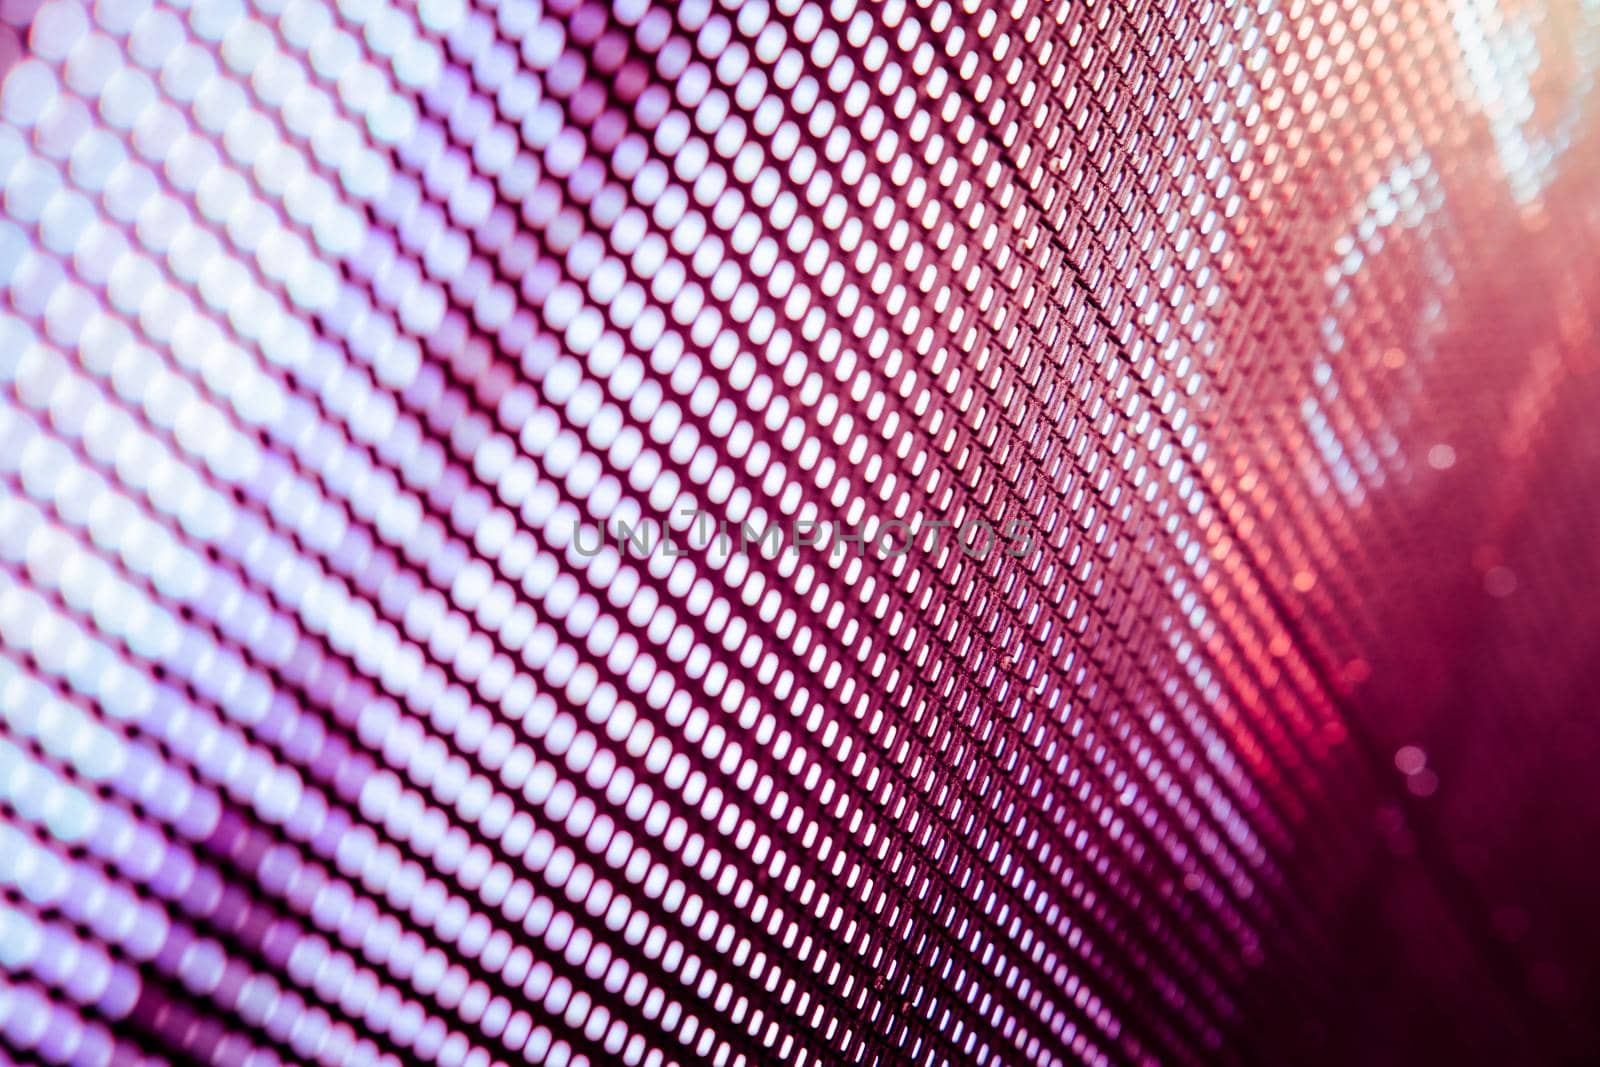 CloseUp LED blurred screen. LED soft focus background. abstract background ideal for design. by teerawit